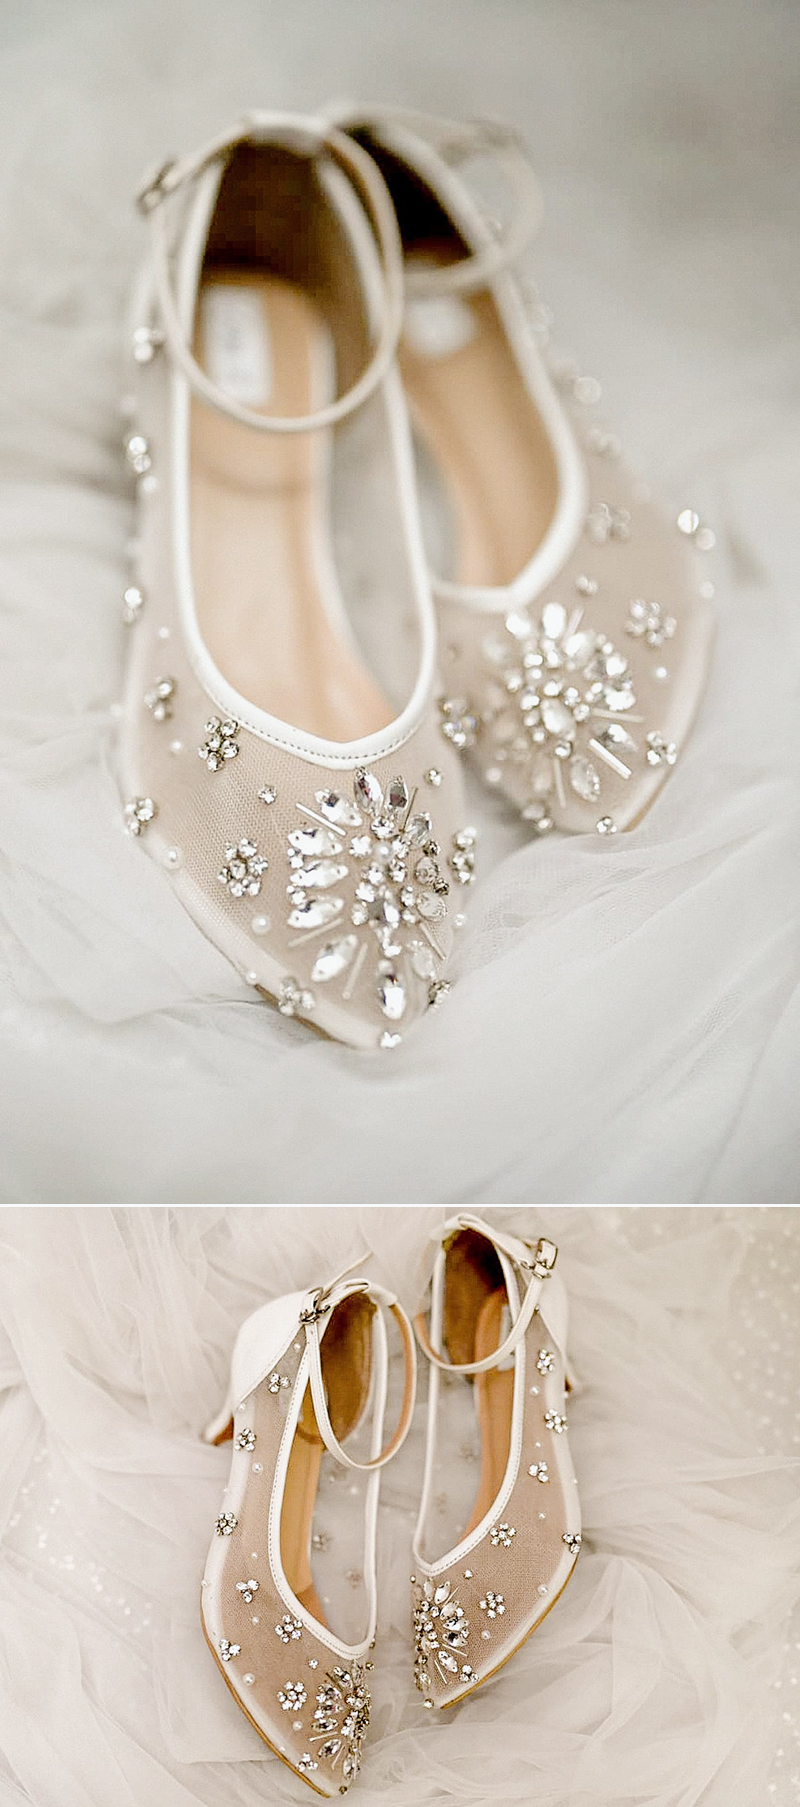 off white wedding shoes low heel